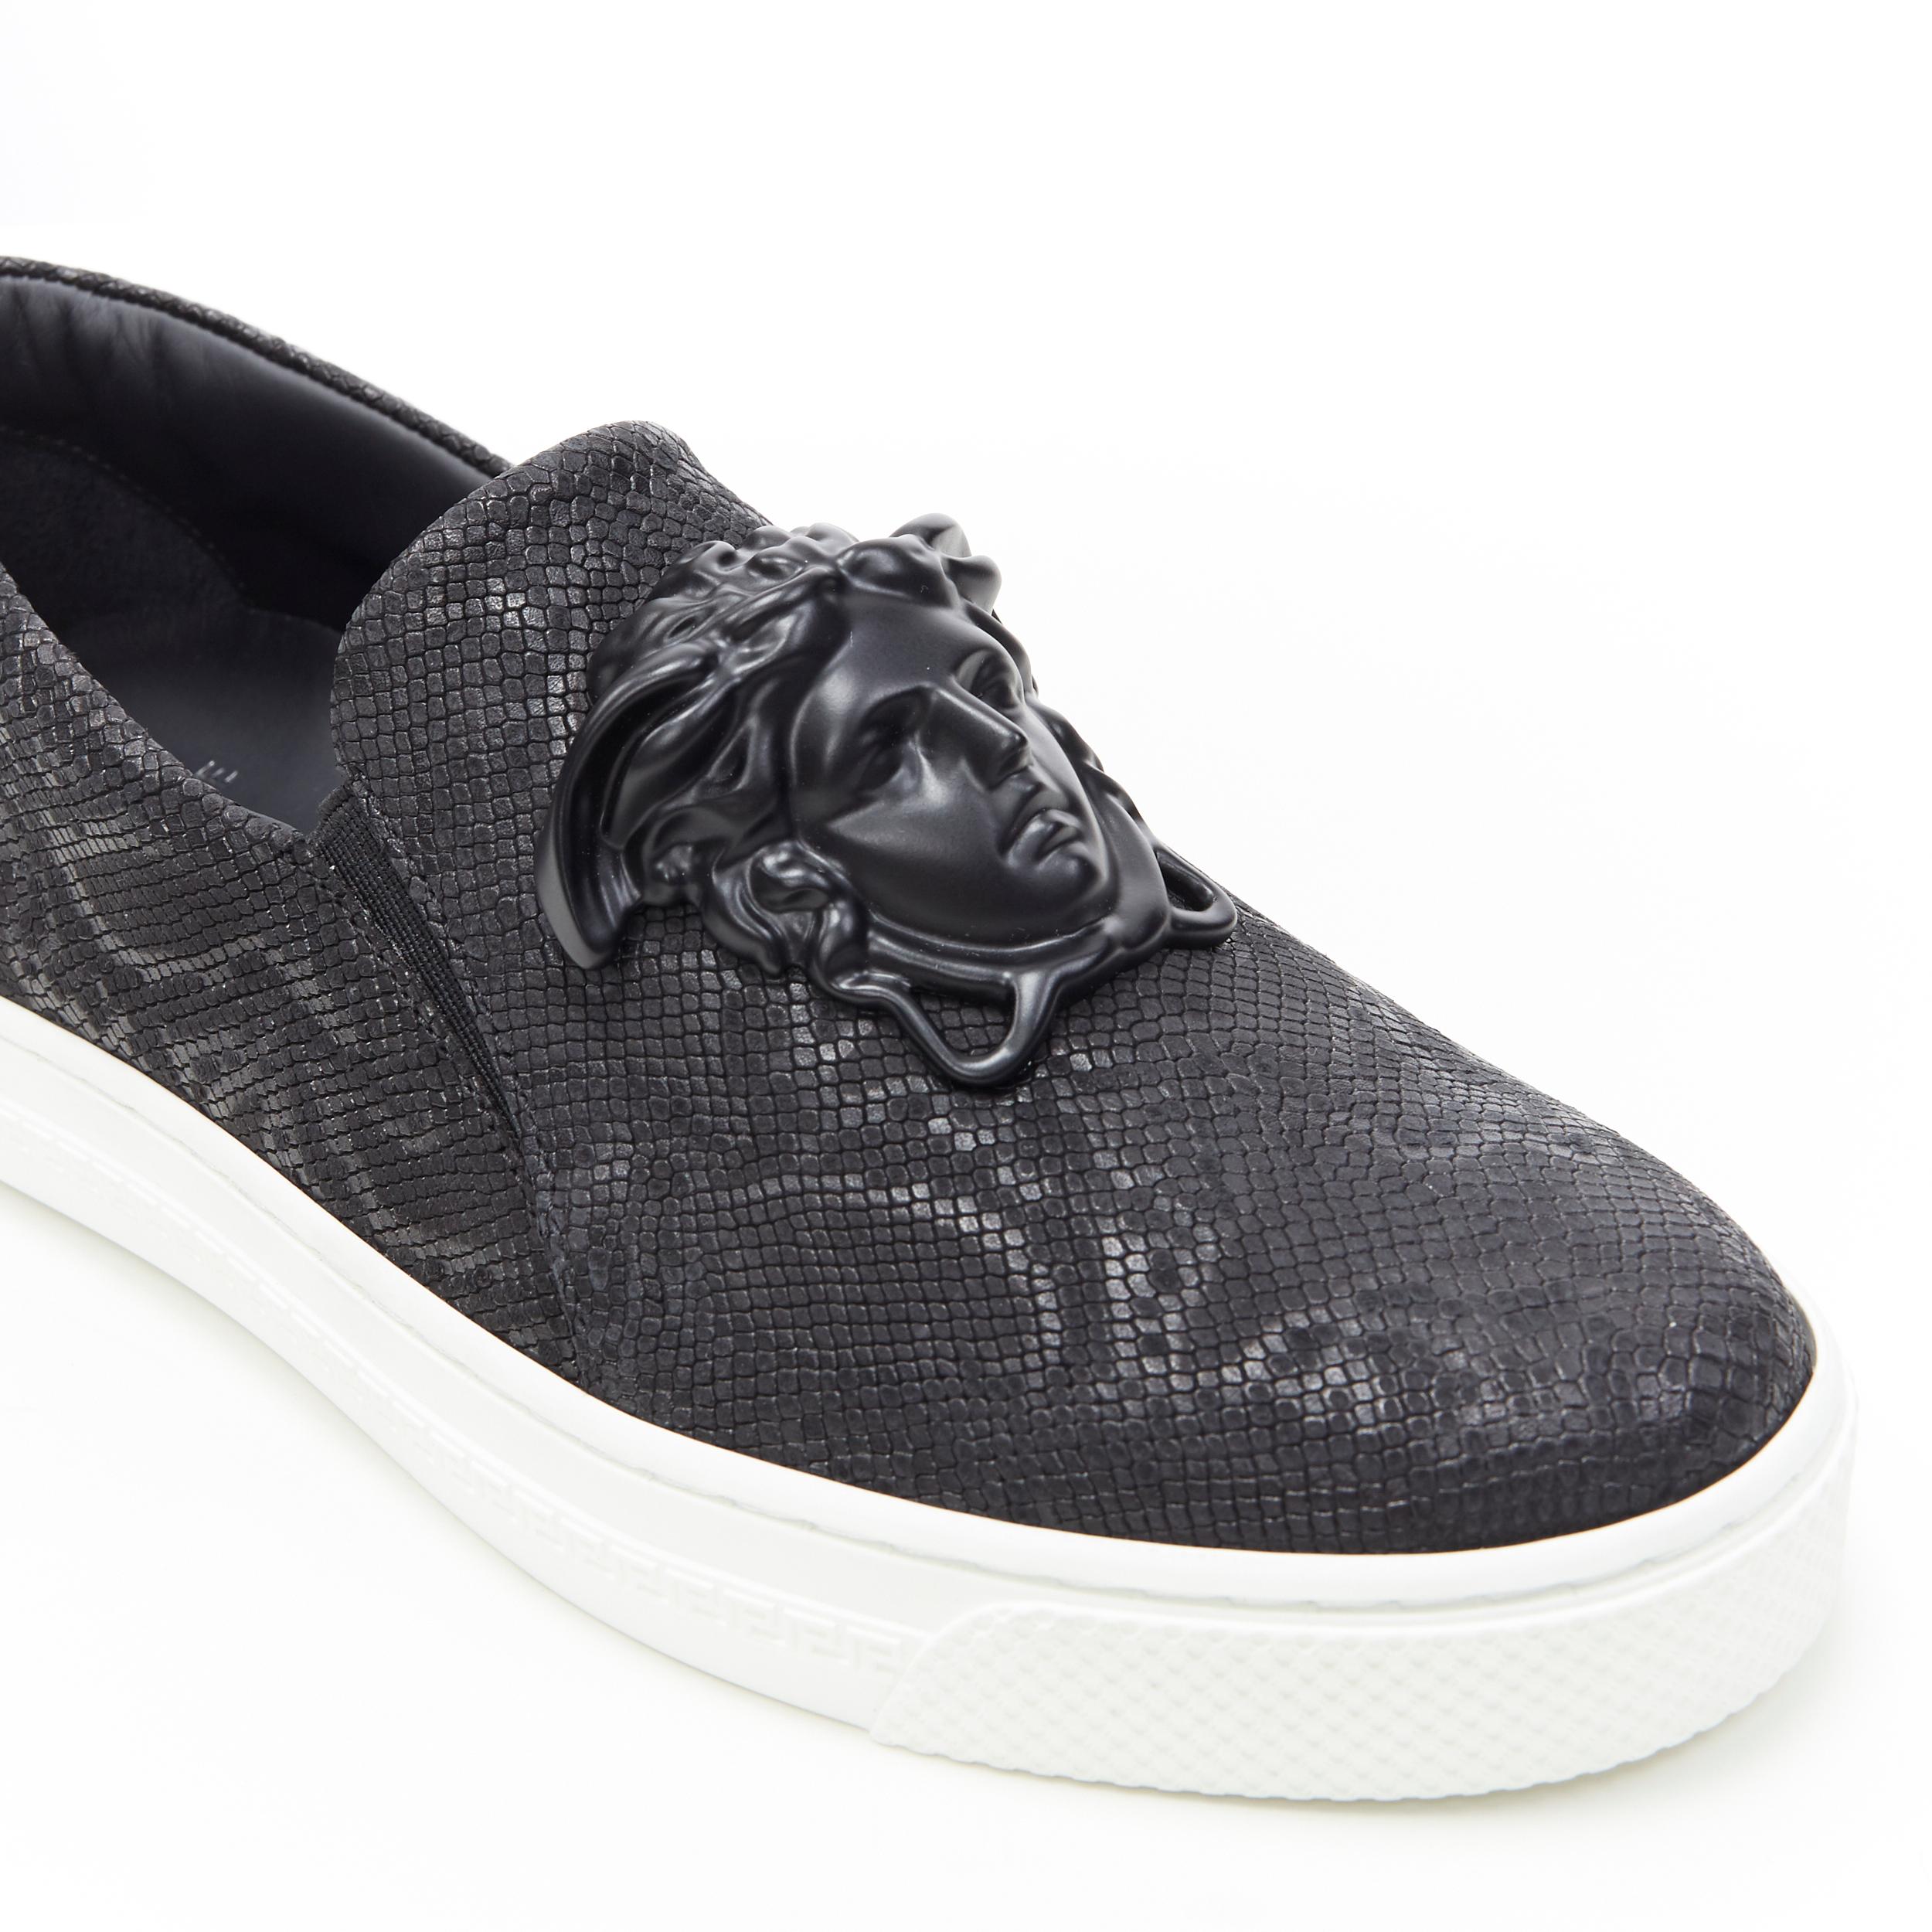 new VERSACE Palazzo Medusa black stamped leather low top skate sneakers EU39
Brand: Versace
Designer: Donatella Versace
Collection: 2019
Model Name / Style: Palazzo Medusa
Material: Leather
Color: Black
Pattern: Snakeskin
Closure: Slip on
Lining